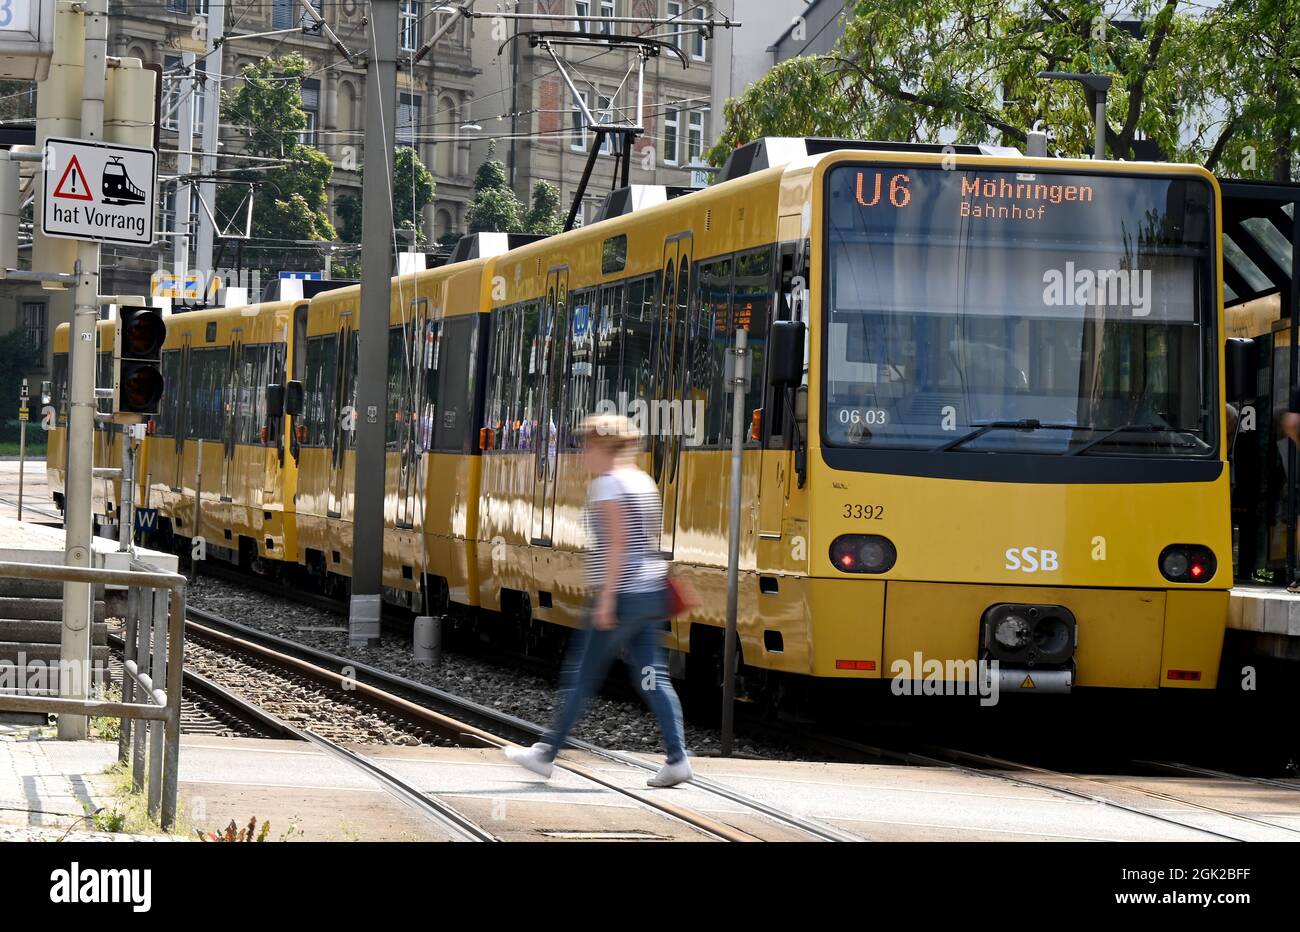 Stuttgart, Germany. 09th Sep, 2021. An underground train runs in Stuttgart in the city. On 18 and 19 September, public transport in zone 1 in Stuttgart is free. The aim is to revitalise the city centre with trade, culture and gastronomy. Credit: Bernd Weißbrod/dpa/Alamy Live News Stock Photo